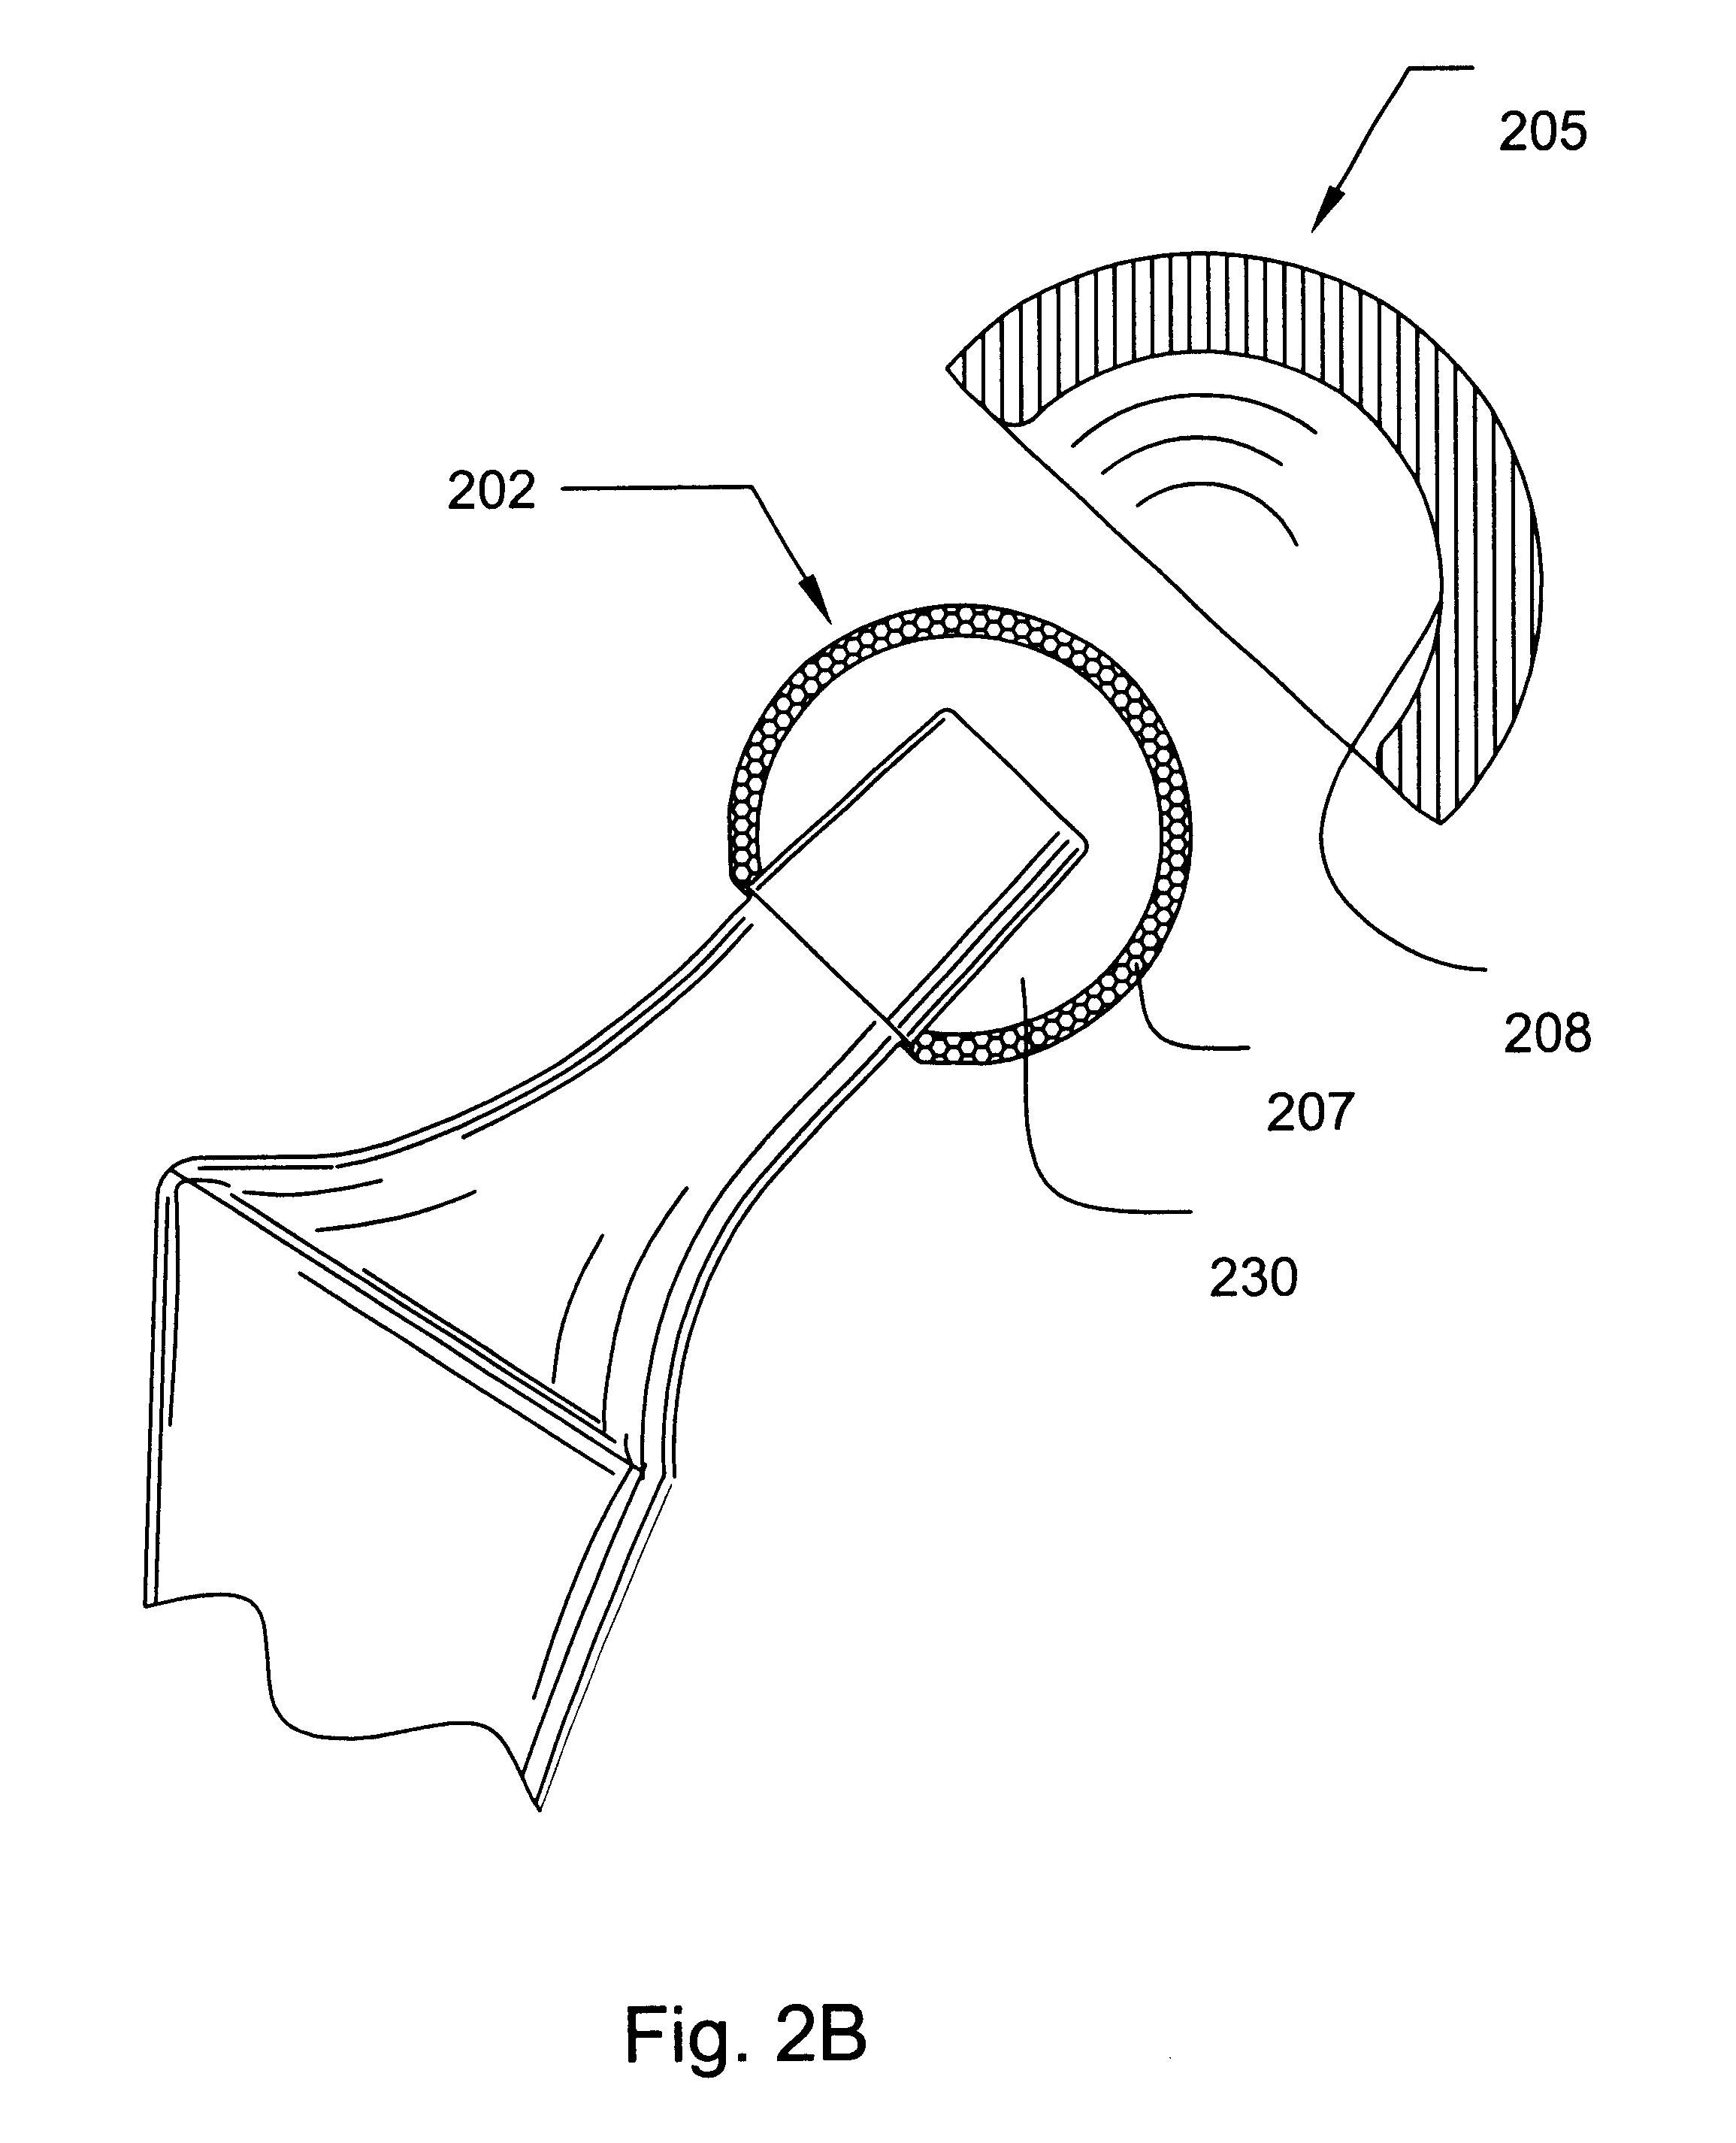 Methods for manufacturing a diamond prosthetic joint component